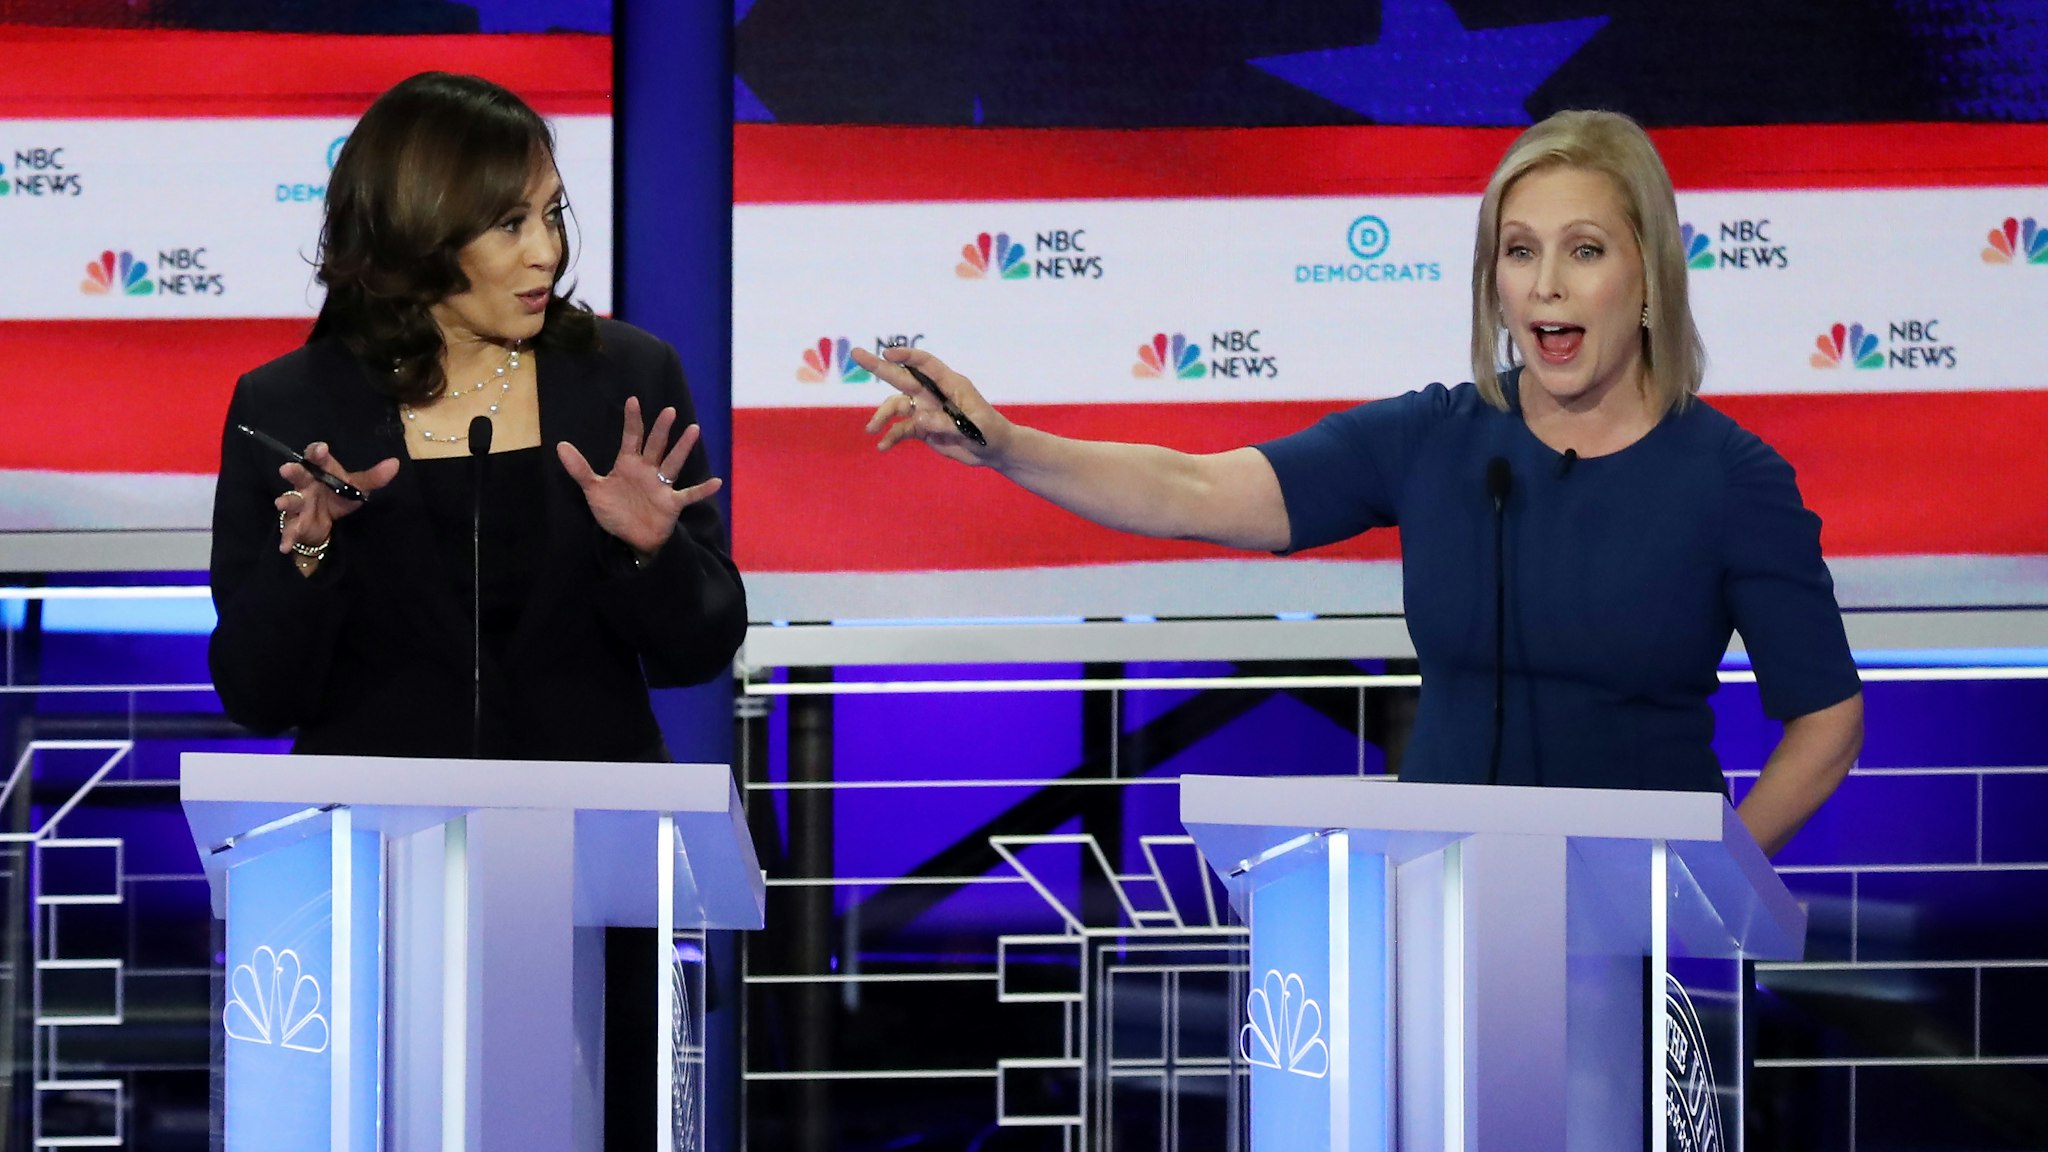 MIAMI, FLORIDA - JUNE 27: Democratic presidential candidate Sen. Kamala Harris (L) (D-CA) and Sen. Kirsten Gillibrand (D-NY) speak during the second night of the first Democratic presidential debate on June 27, 2019 in Miami, Florida. A field of 20 Democratic presidential candidates was split into two groups of 10 for the first debate of the 2020 election, taking place over two nights at Knight Concert Hall of the Adrienne Arsht Center for the Performing Arts of Miami-Dade County, hosted by NBC News, MSNBC, and Telemundo.